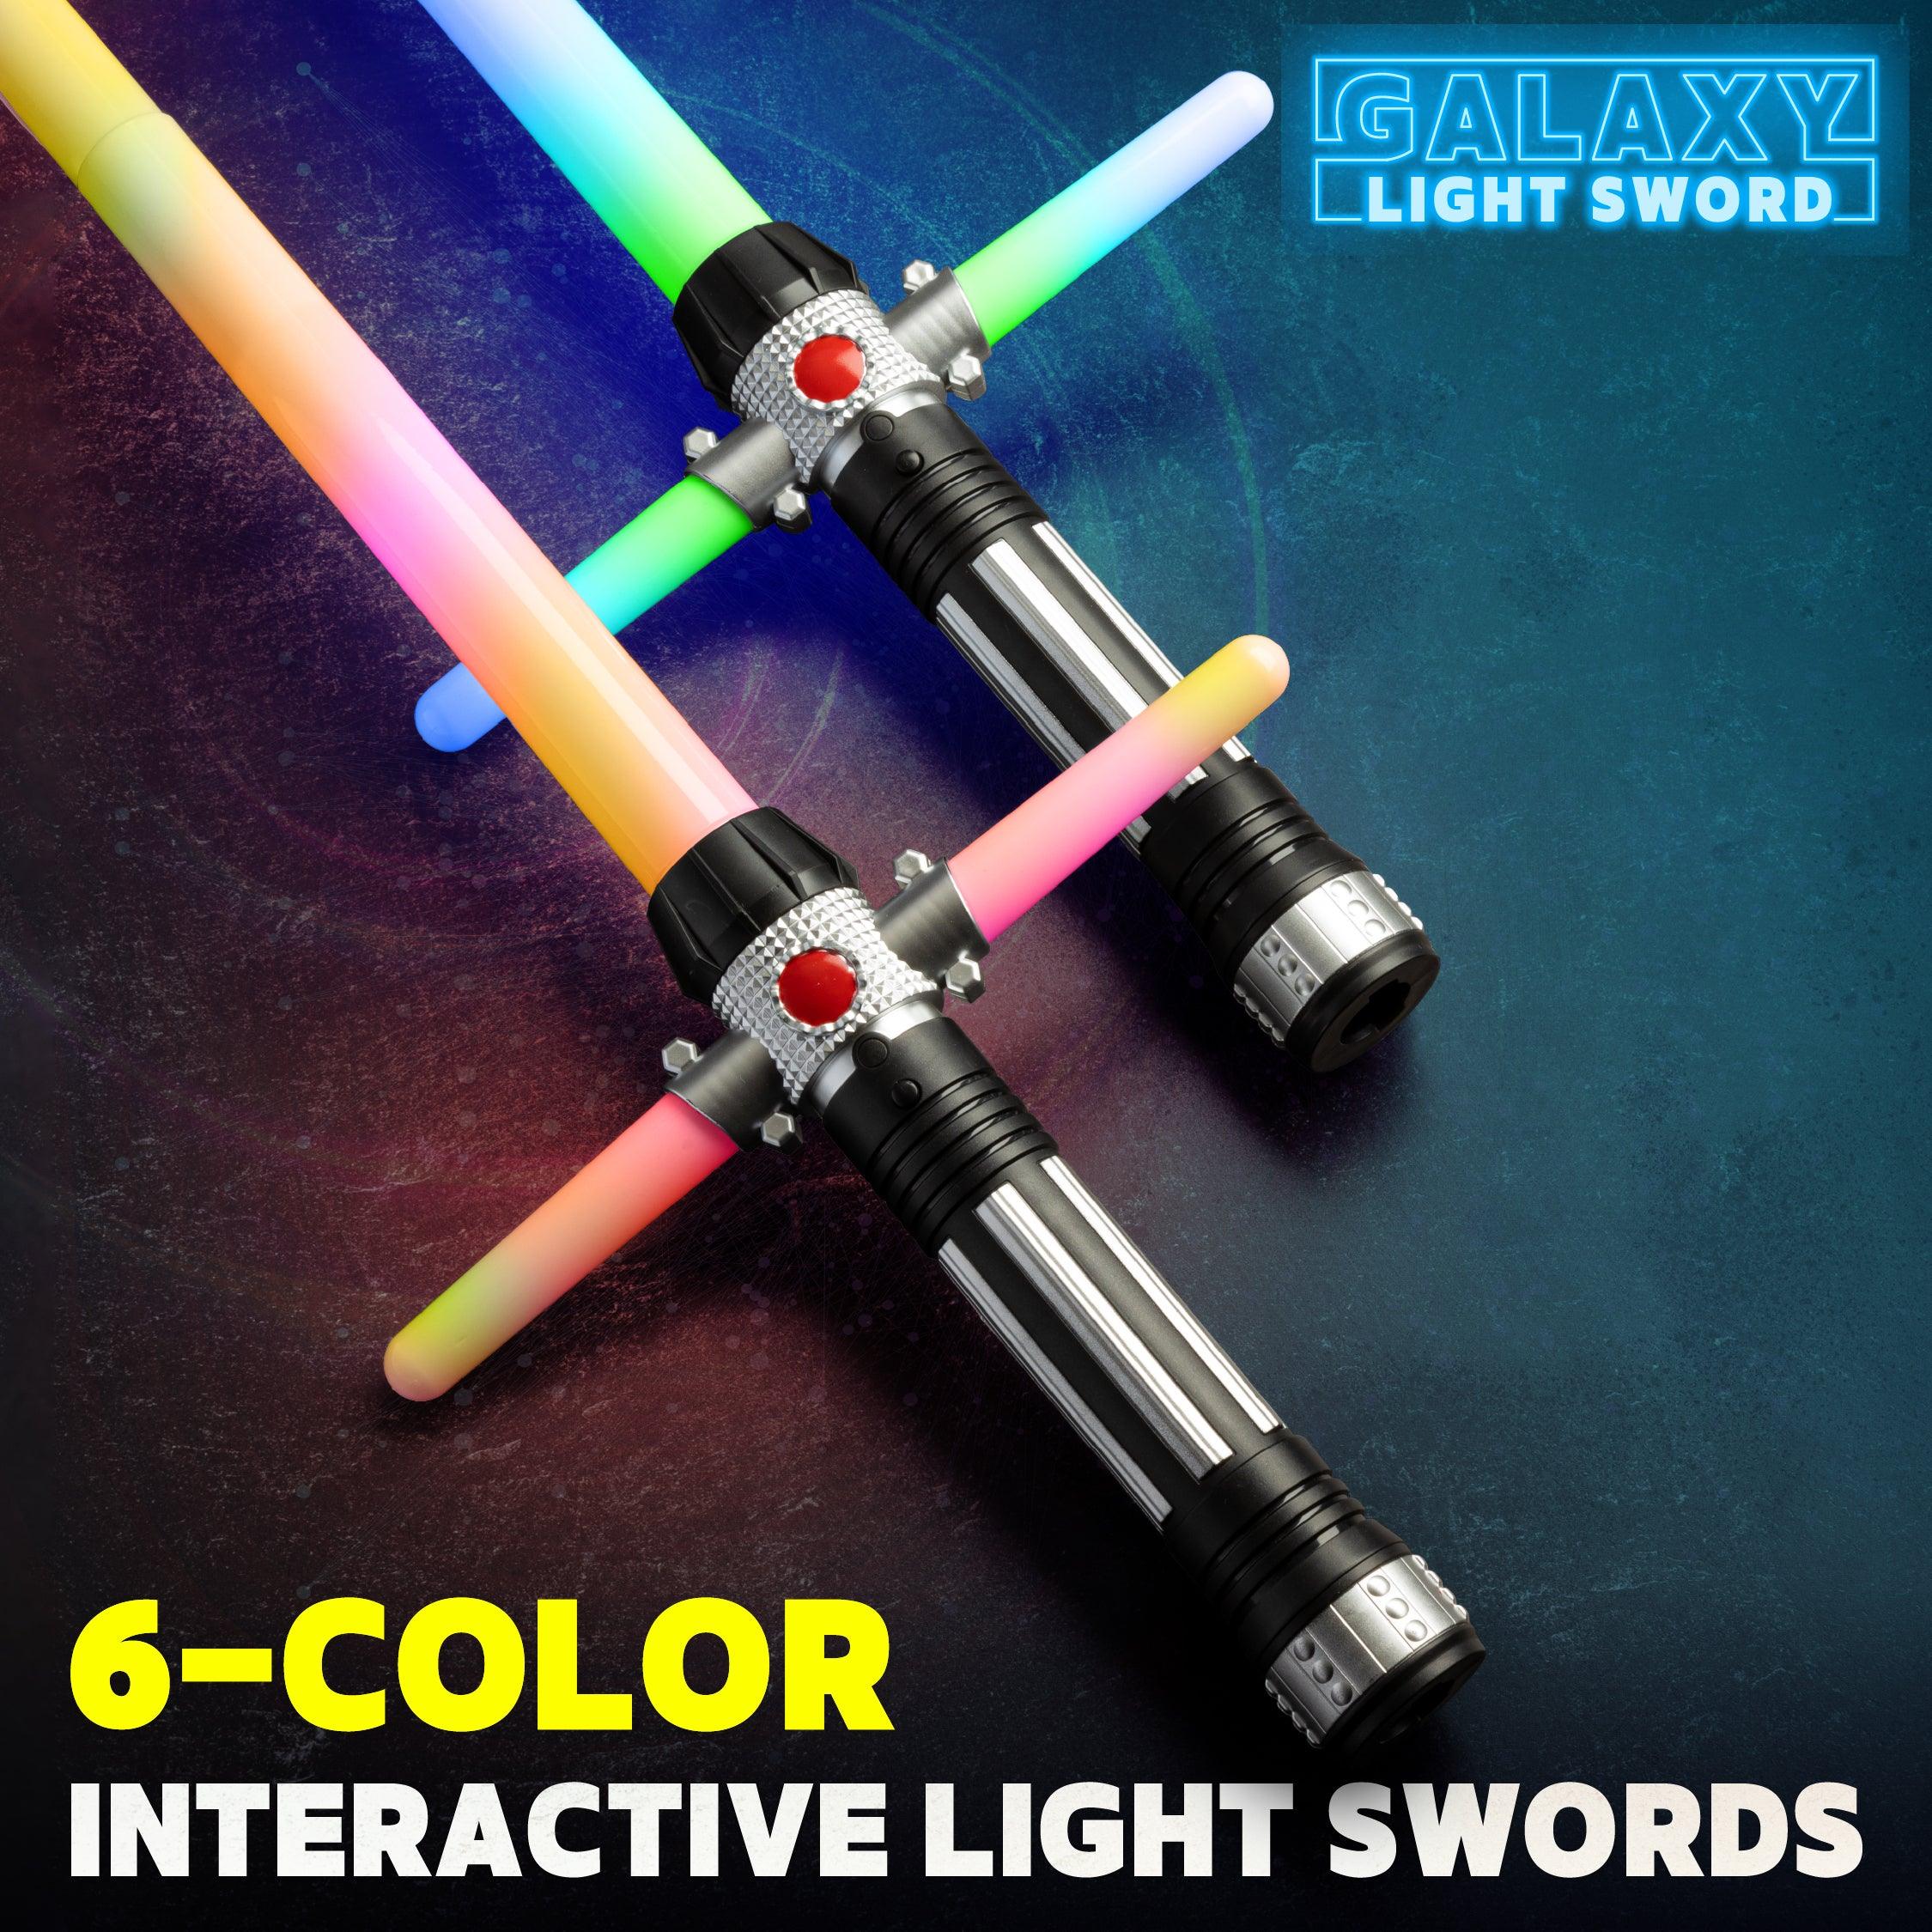 USA Toyz Galaxy Light Swords for Kids or Adults - 2pk Expandable and Connectable Light Up Swords with 6 Color-Changing LEDs and Sound FX - USA Toyz